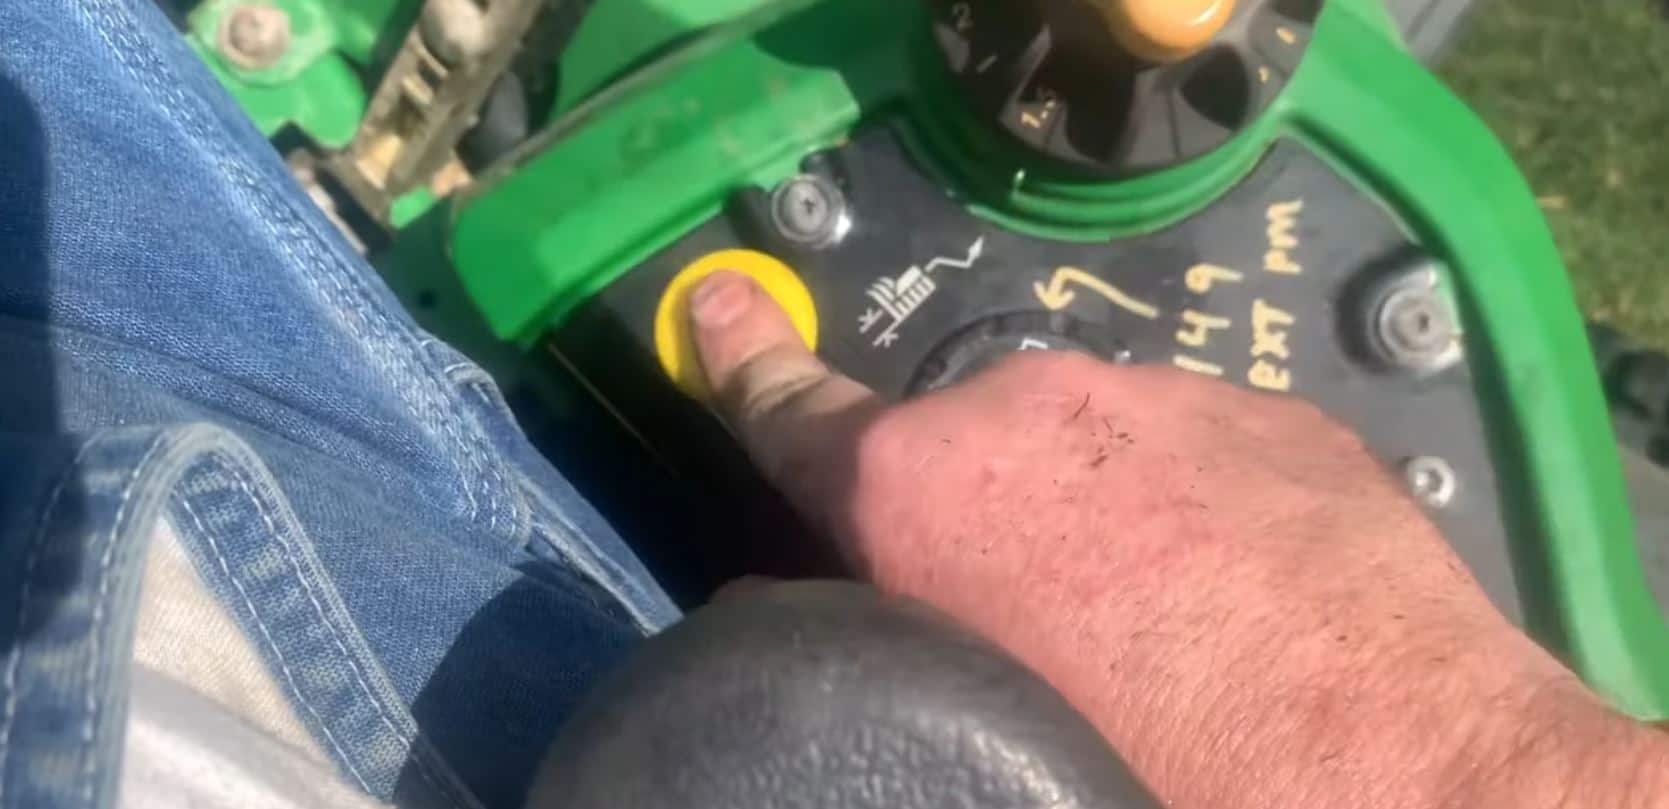 john-deer-lawn-tractor-problems-pushing-yellow-button-hand